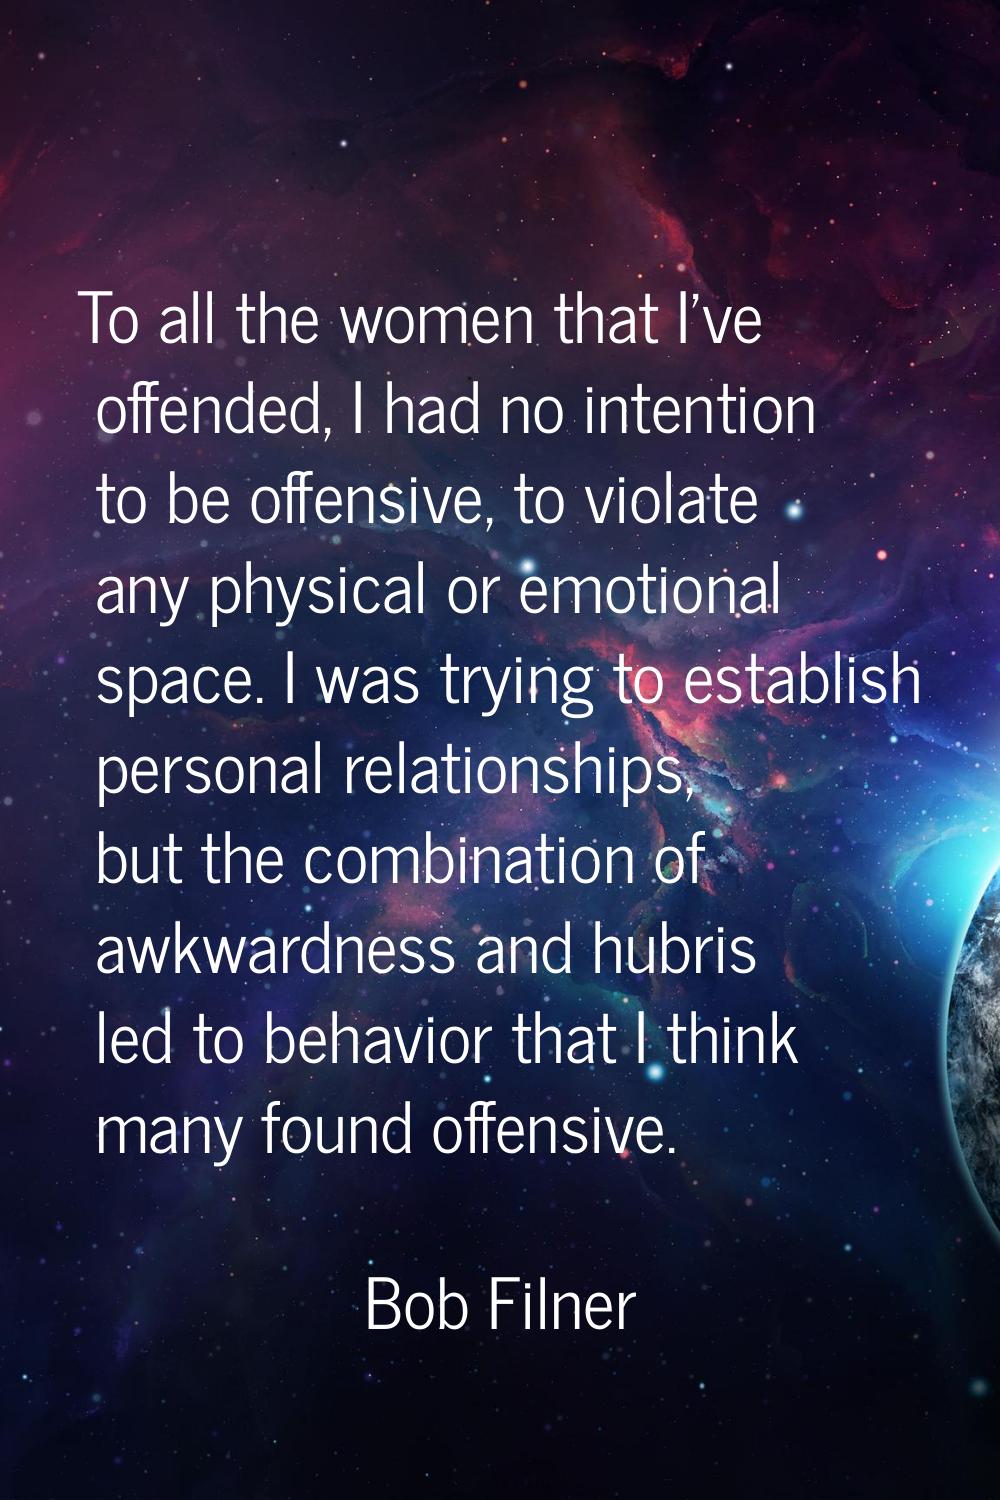 To all the women that I've offended, I had no intention to be offensive, to violate any physical or